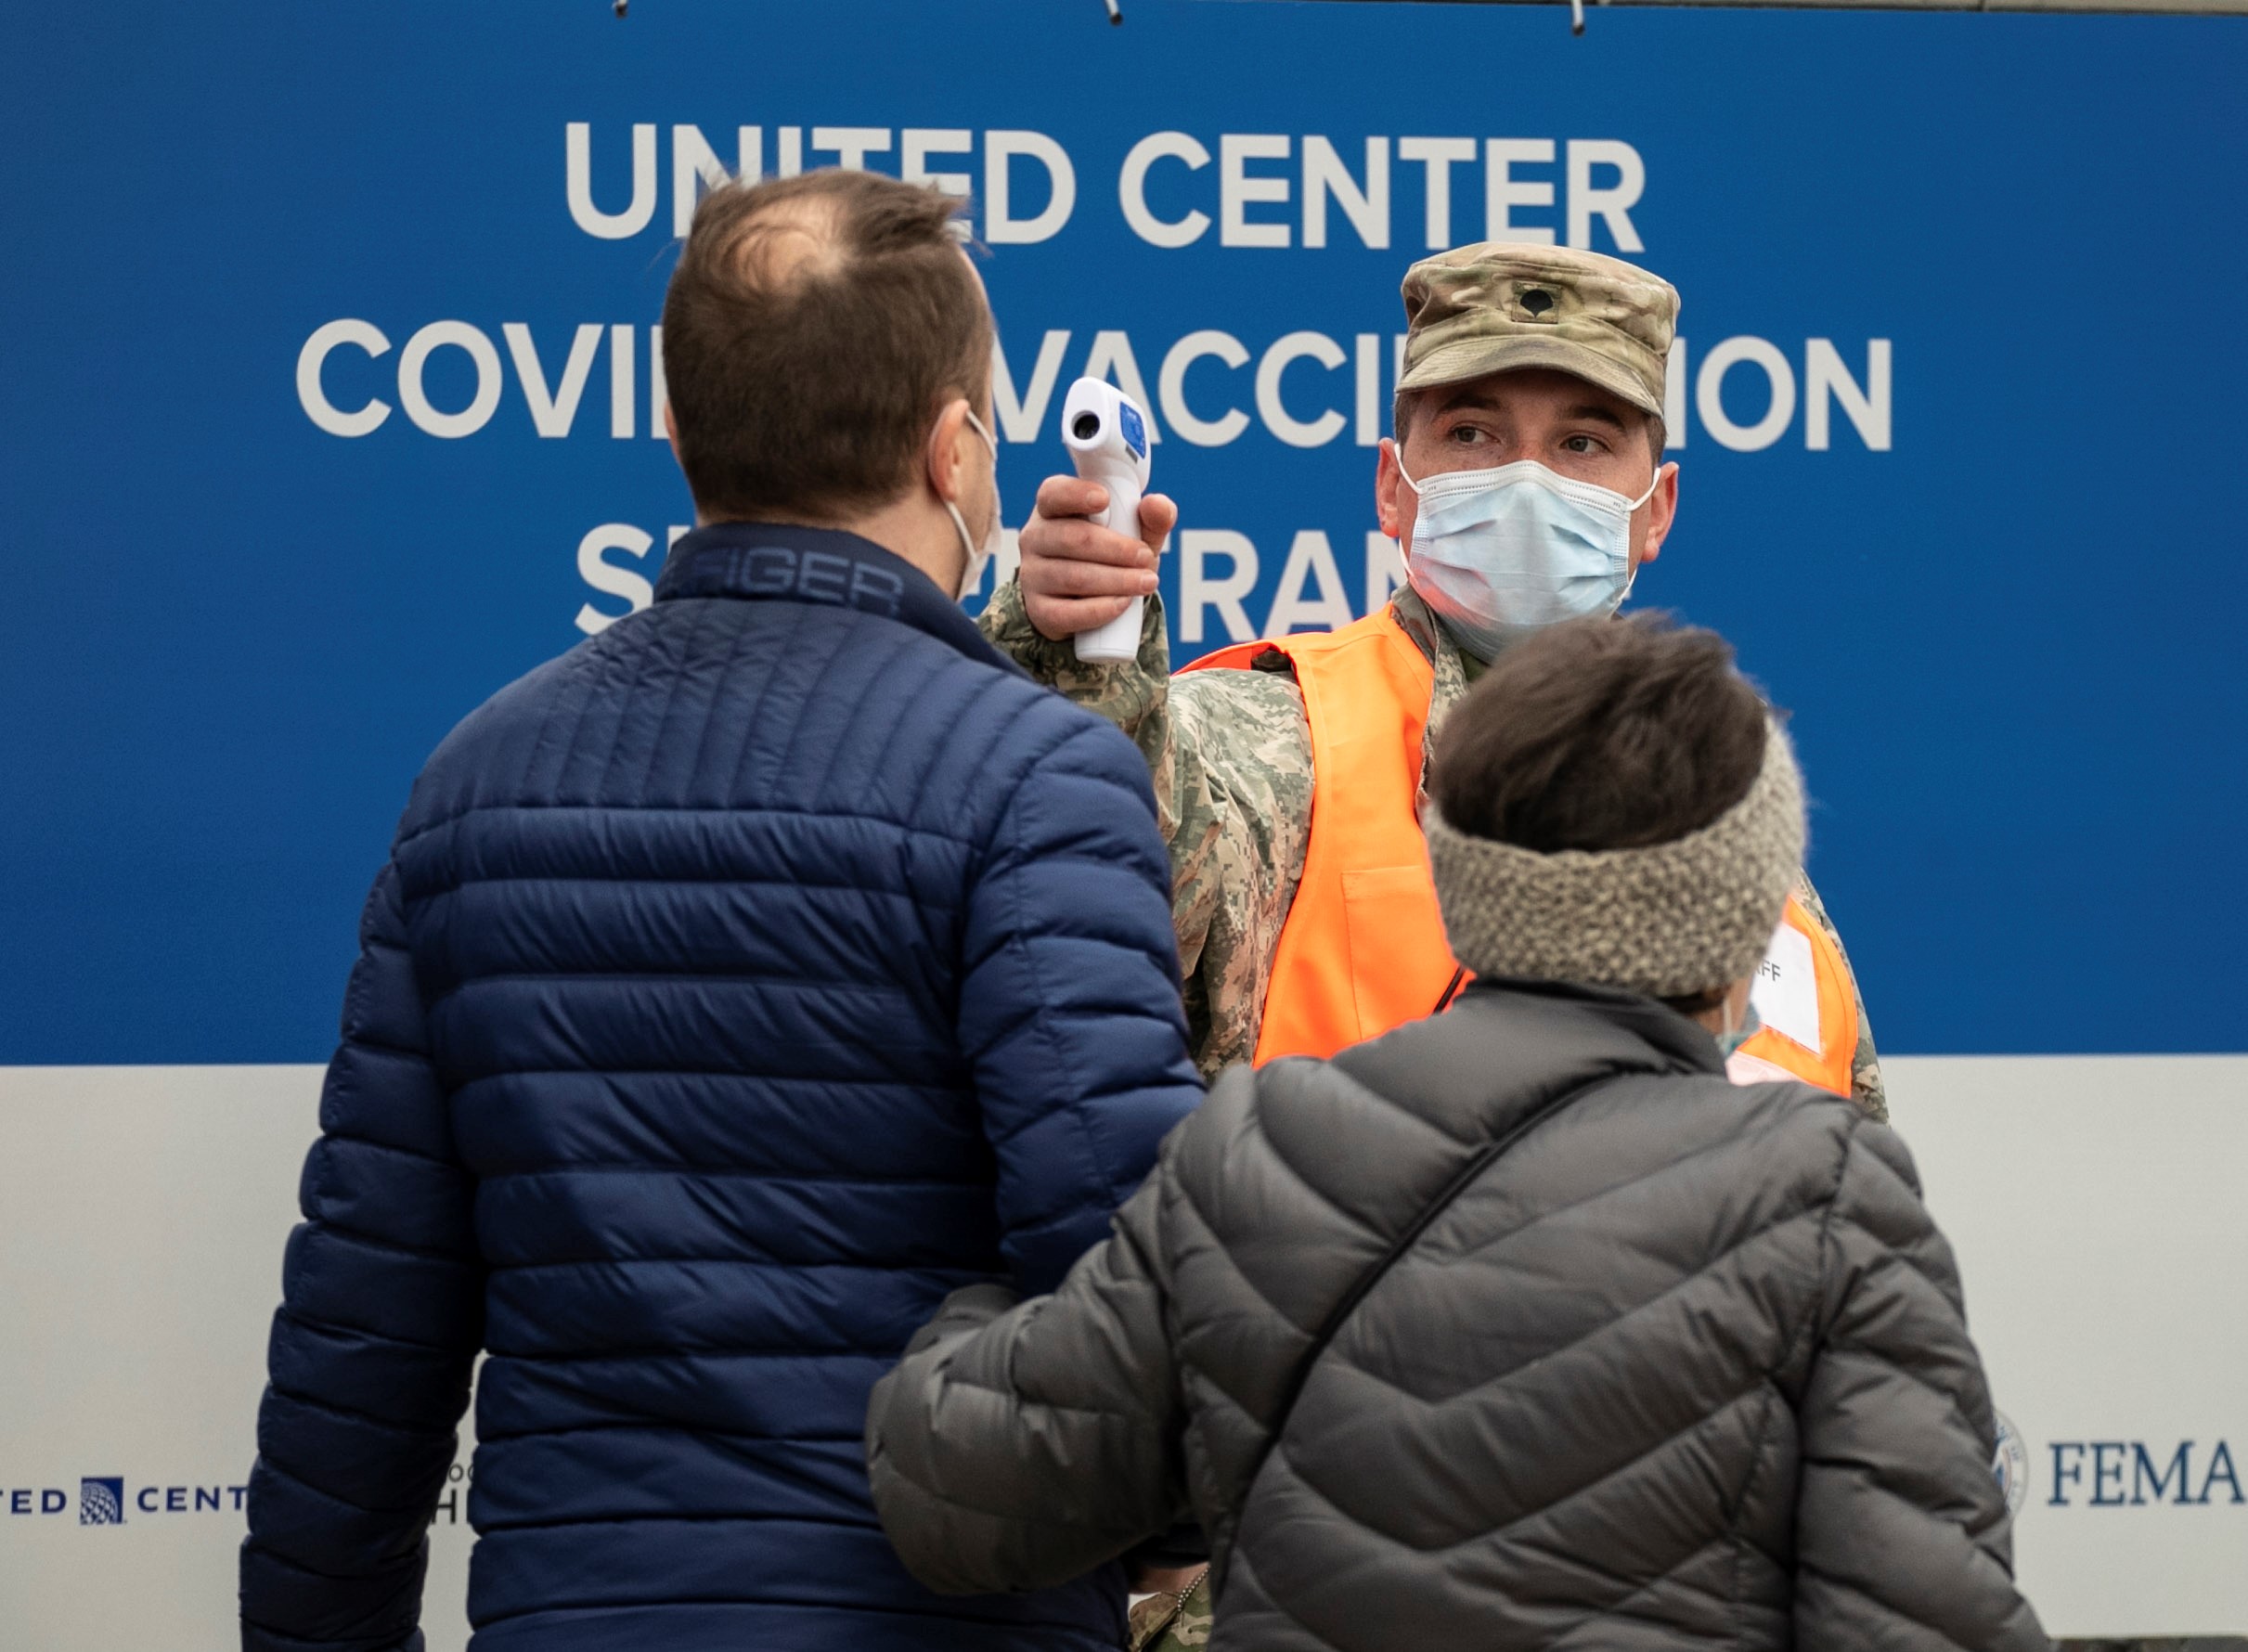 U.S.-CHICAGO-MASS VACCINATION SITE-OPENING